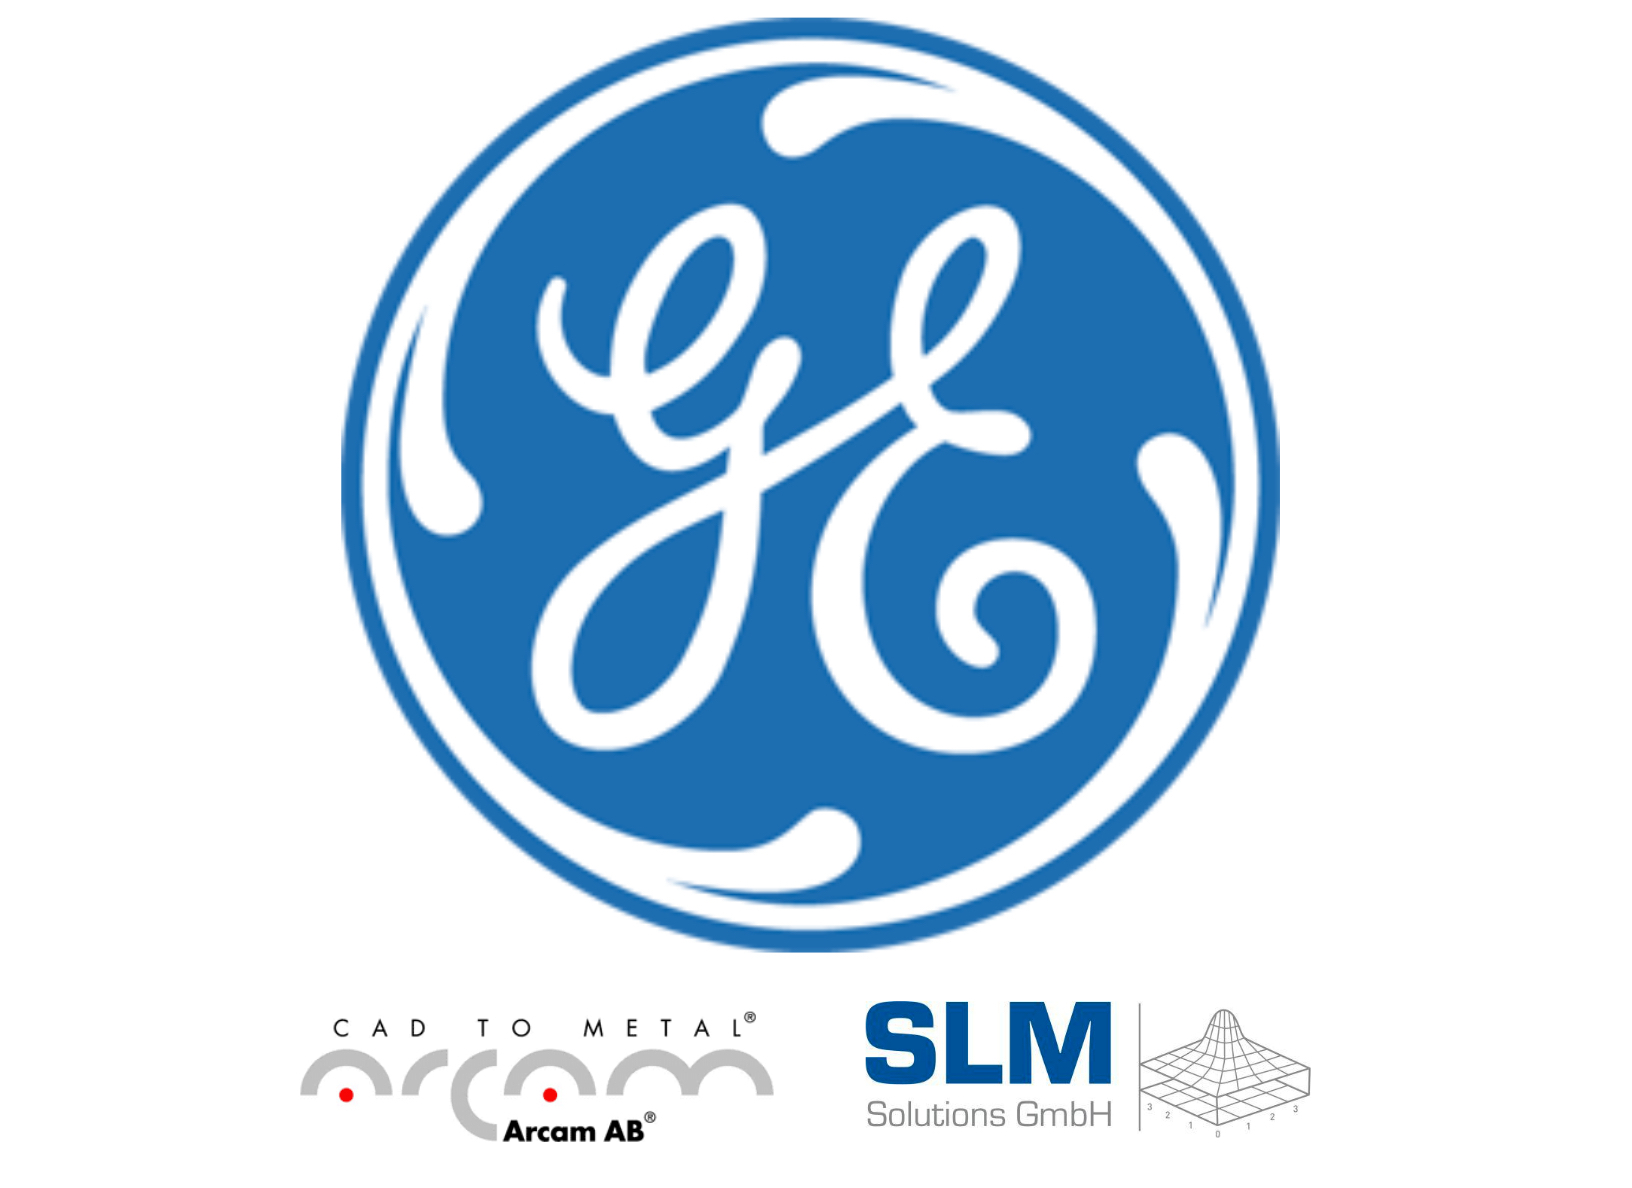  GE acquires two metal 3D printing companies 